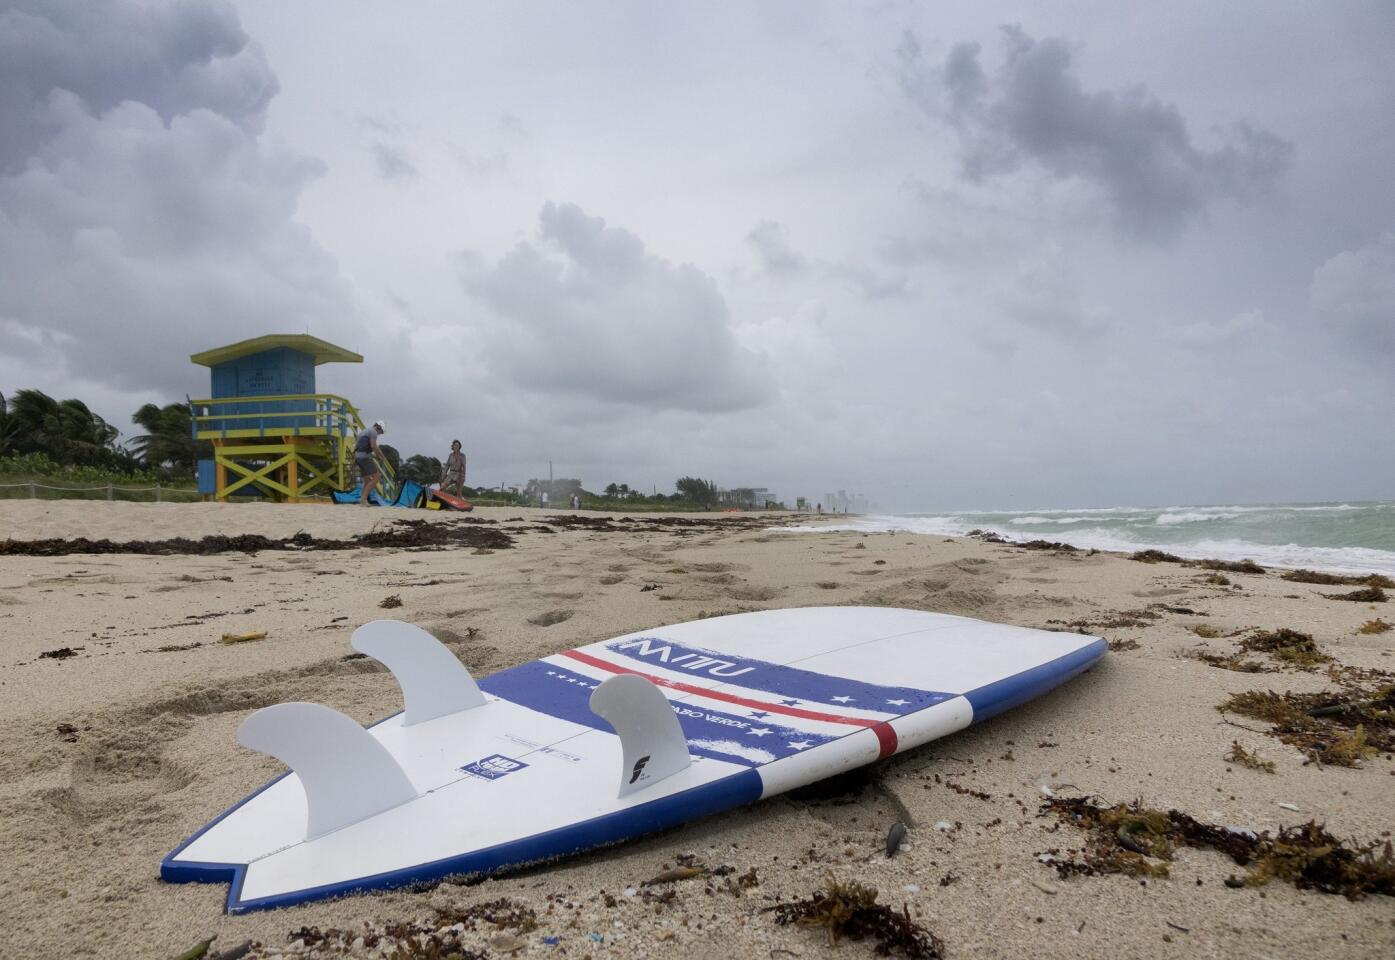 A surfboard is shown at in Miami Beach, Florida on Oct. 6, 2016 as Hurricane Matthew approaches.